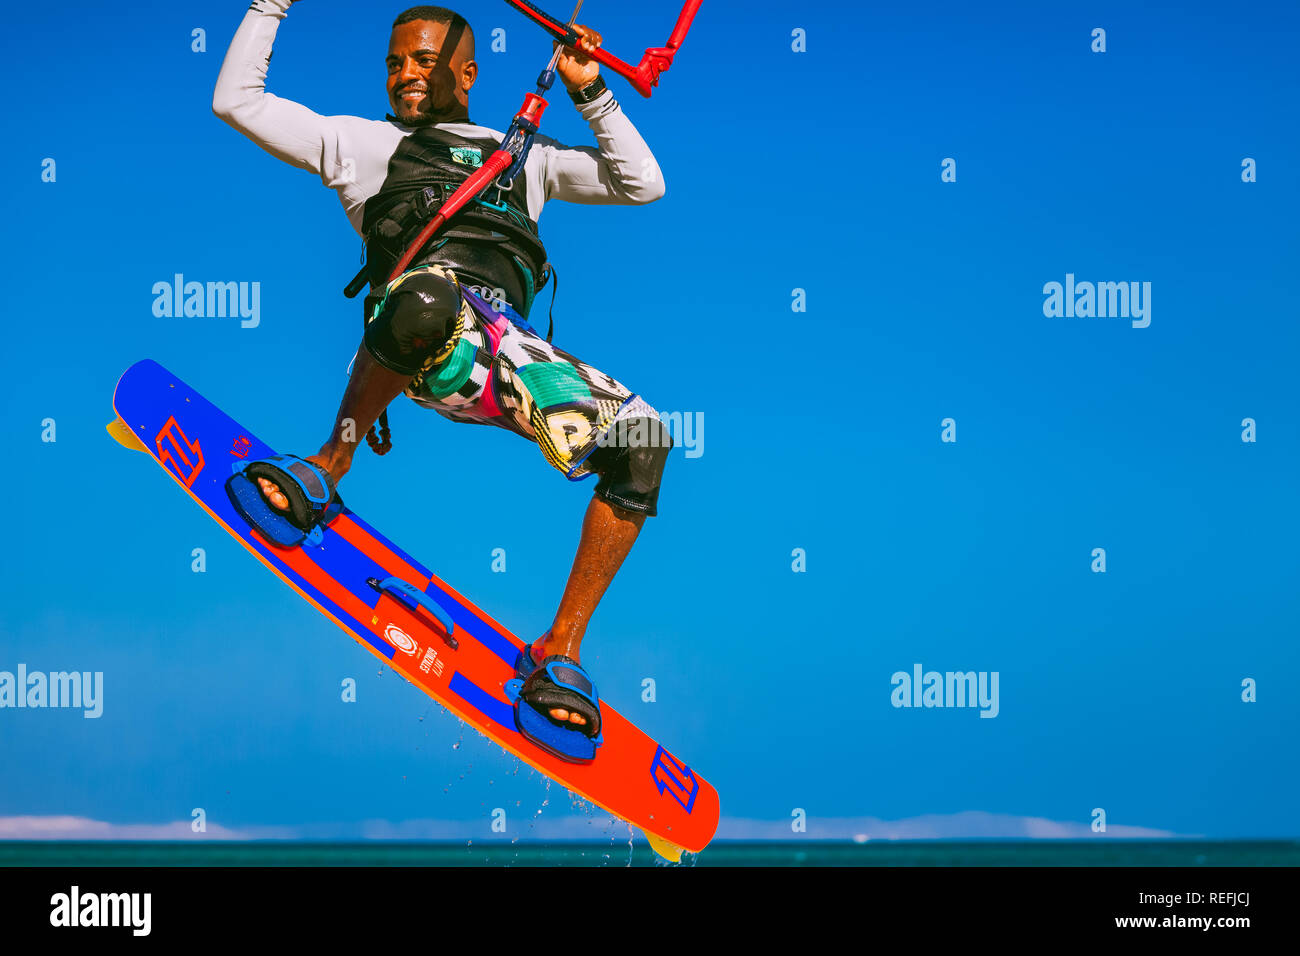 Egypt, Hurghada - 30 November, 2017: The kitesurfer soaring over the Red sea surface. Close-up sportsman fully equipped with the board and kite elemen Stock Photo